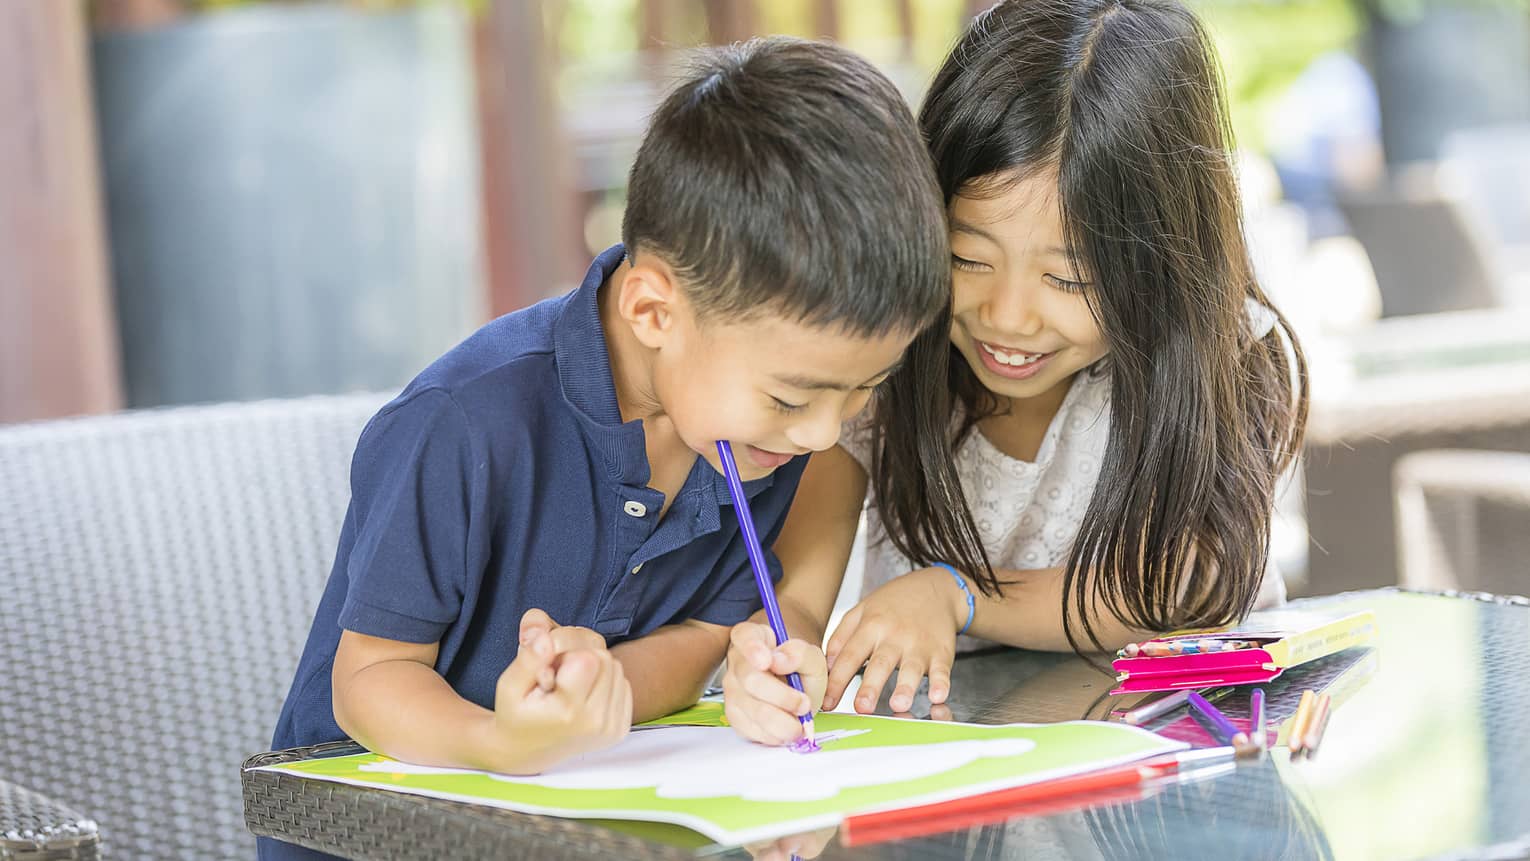 Smiling young boy and girl colouring in book with crayon